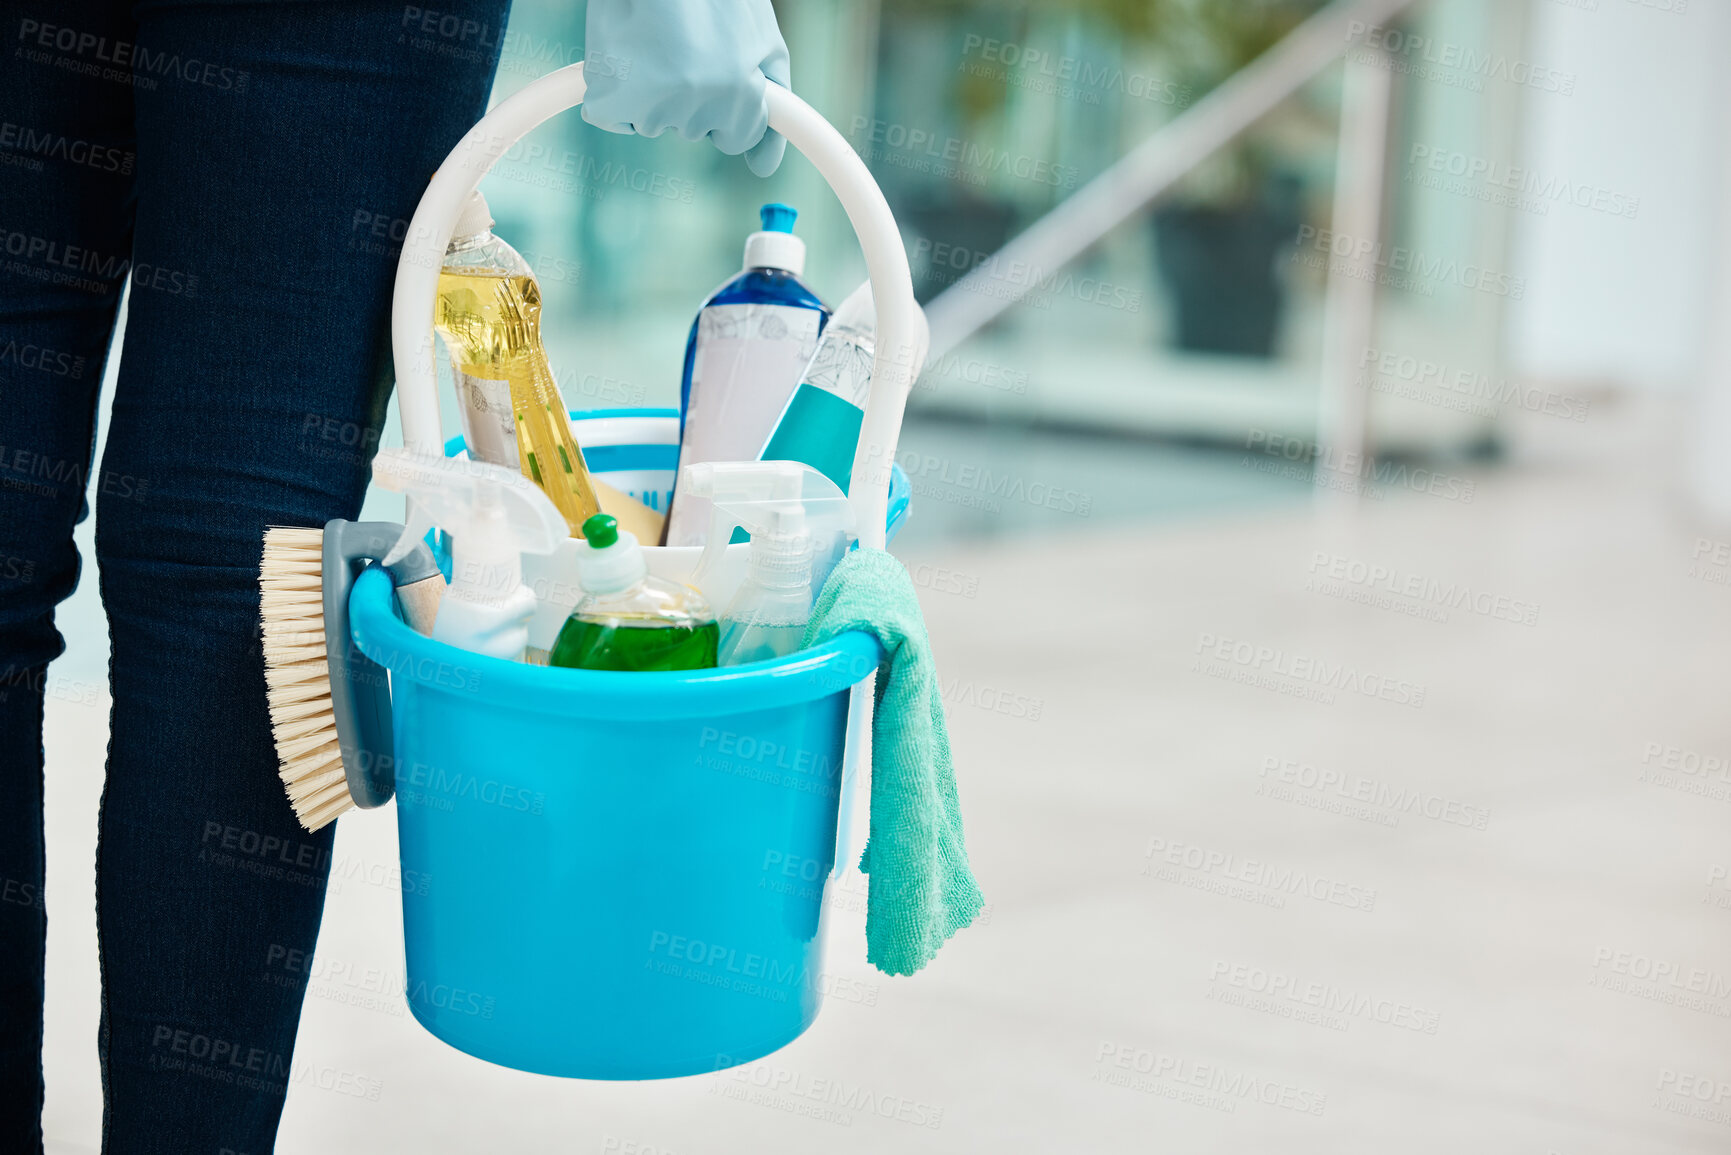 Buy stock photo Cleaning container products with cleaner person hand in a office building or corporate business. Service worker scrub, gloves and liquid soap for disinfectant, sanitize and hygiene in the workplace